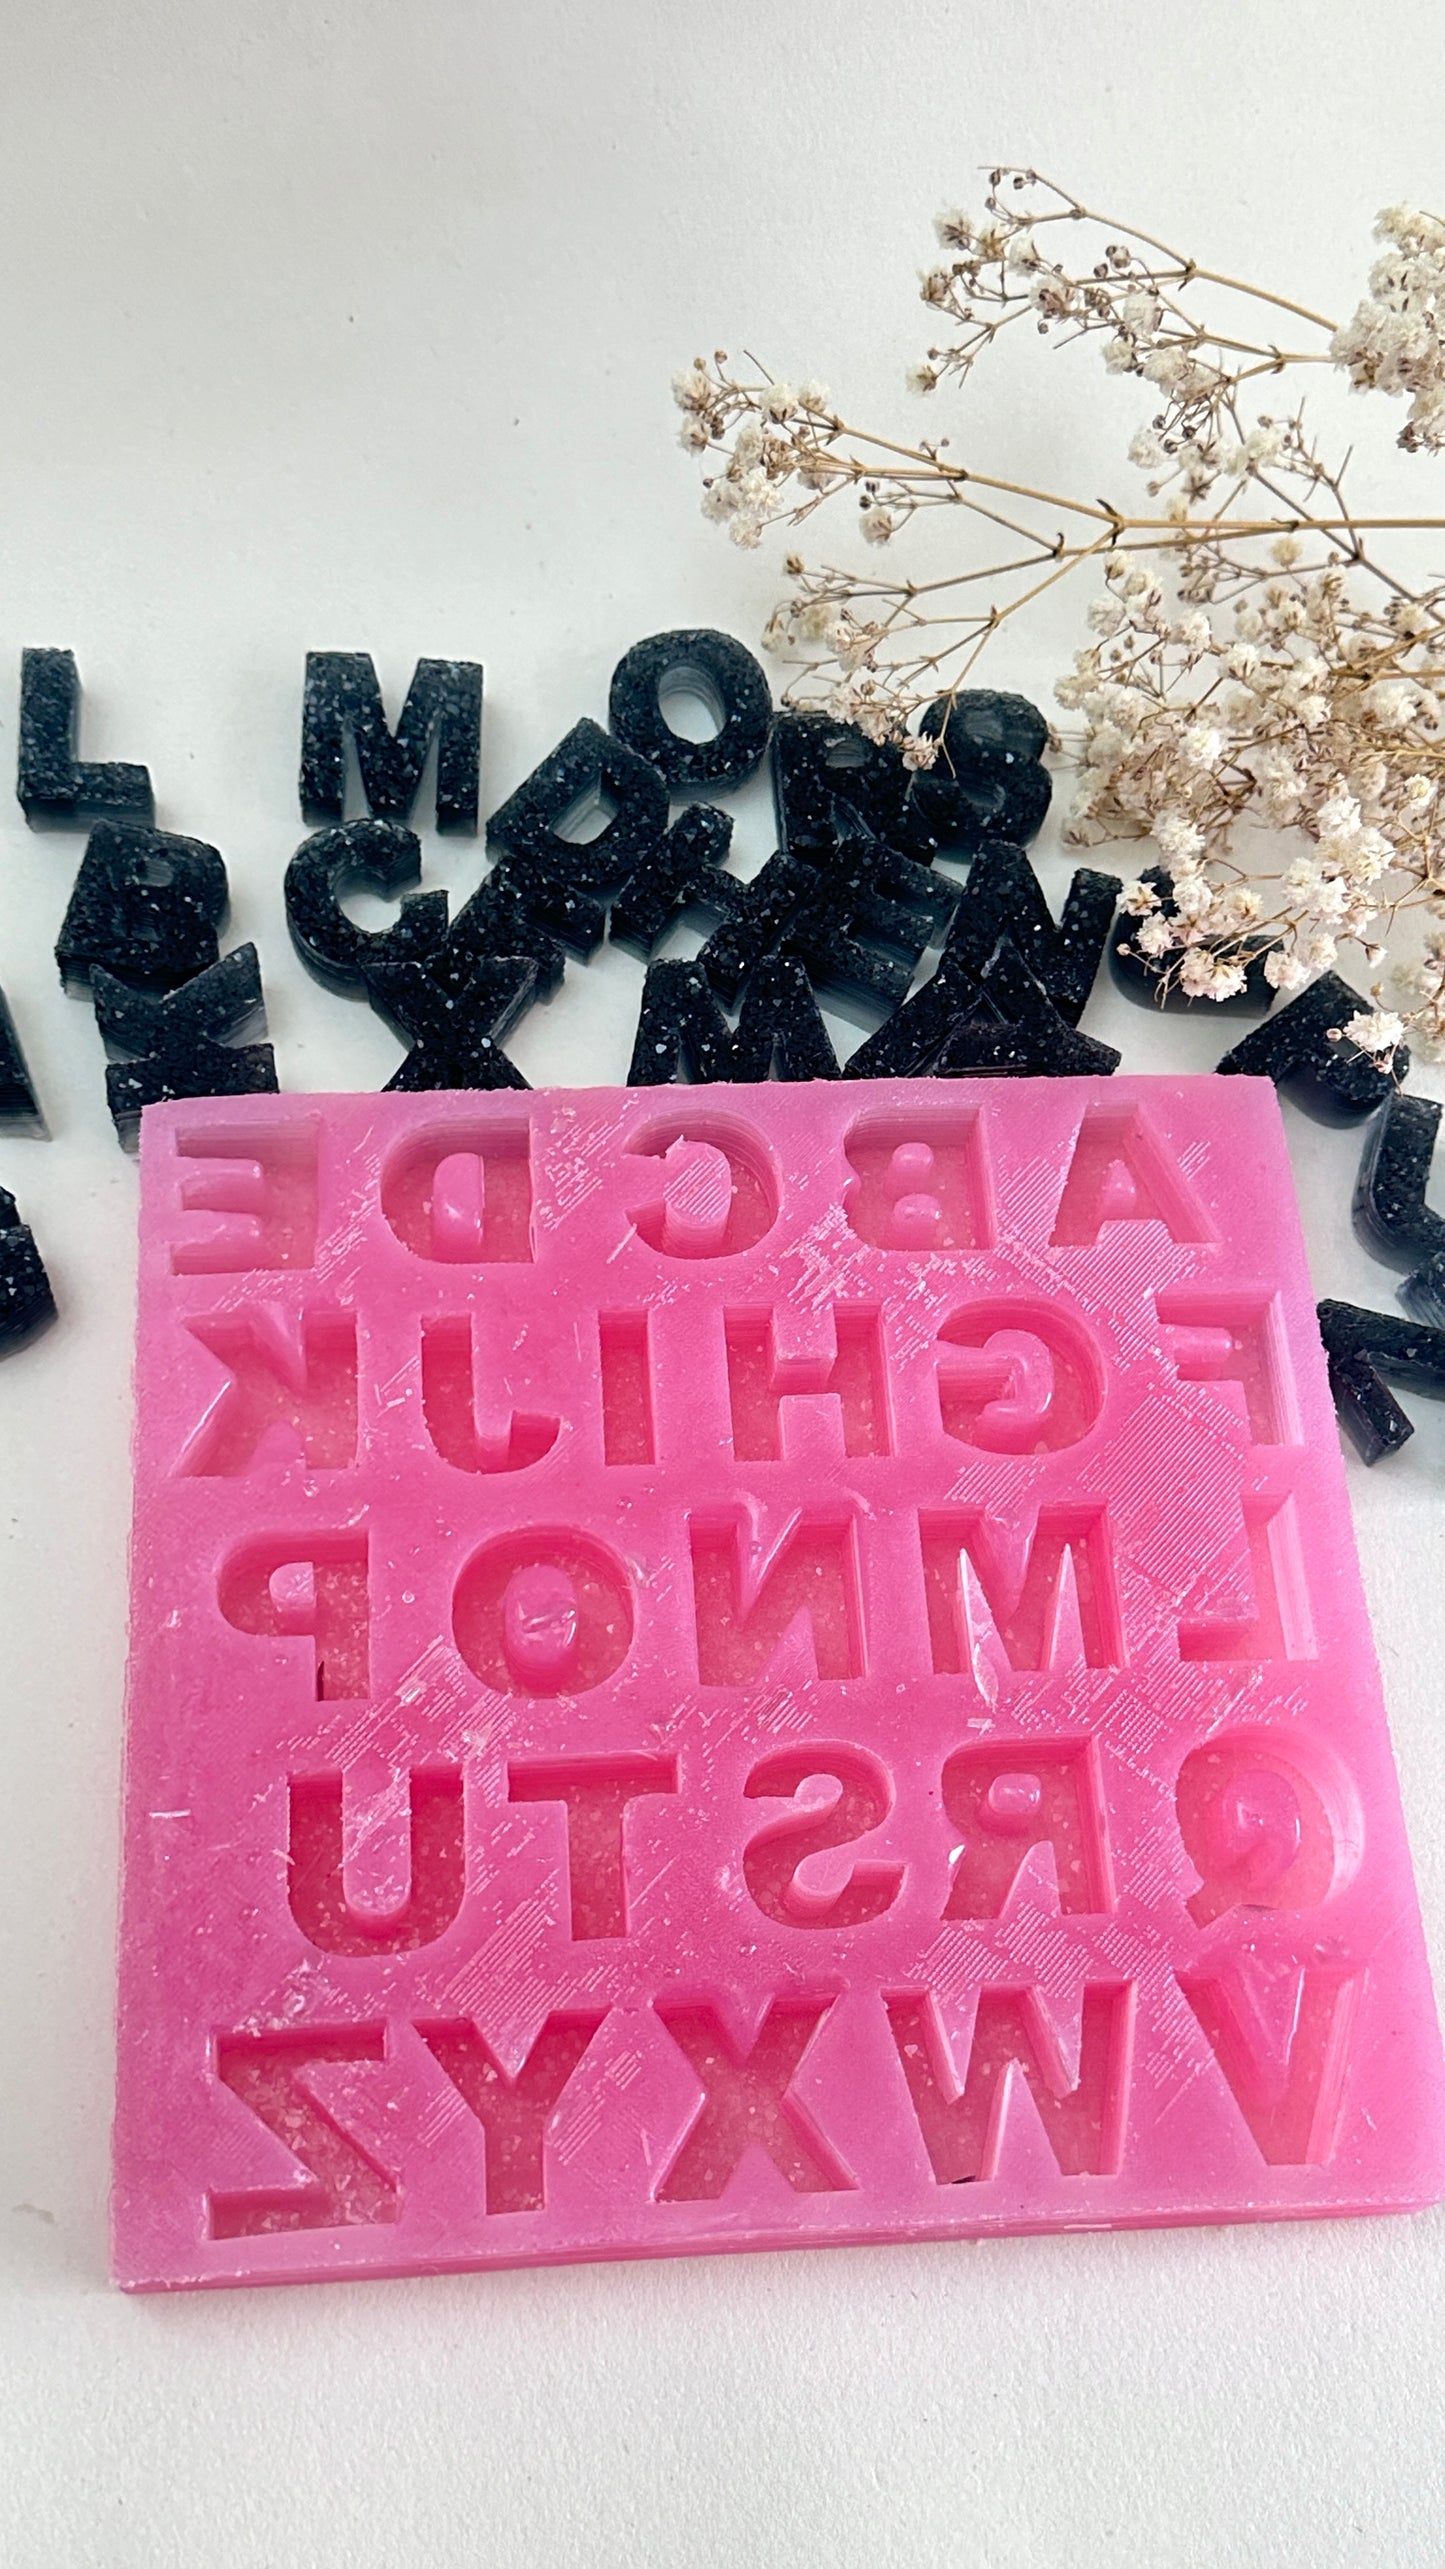 Stunning Silicone Mold with Crystals Alphabet, Artistic Resin Casting Tool